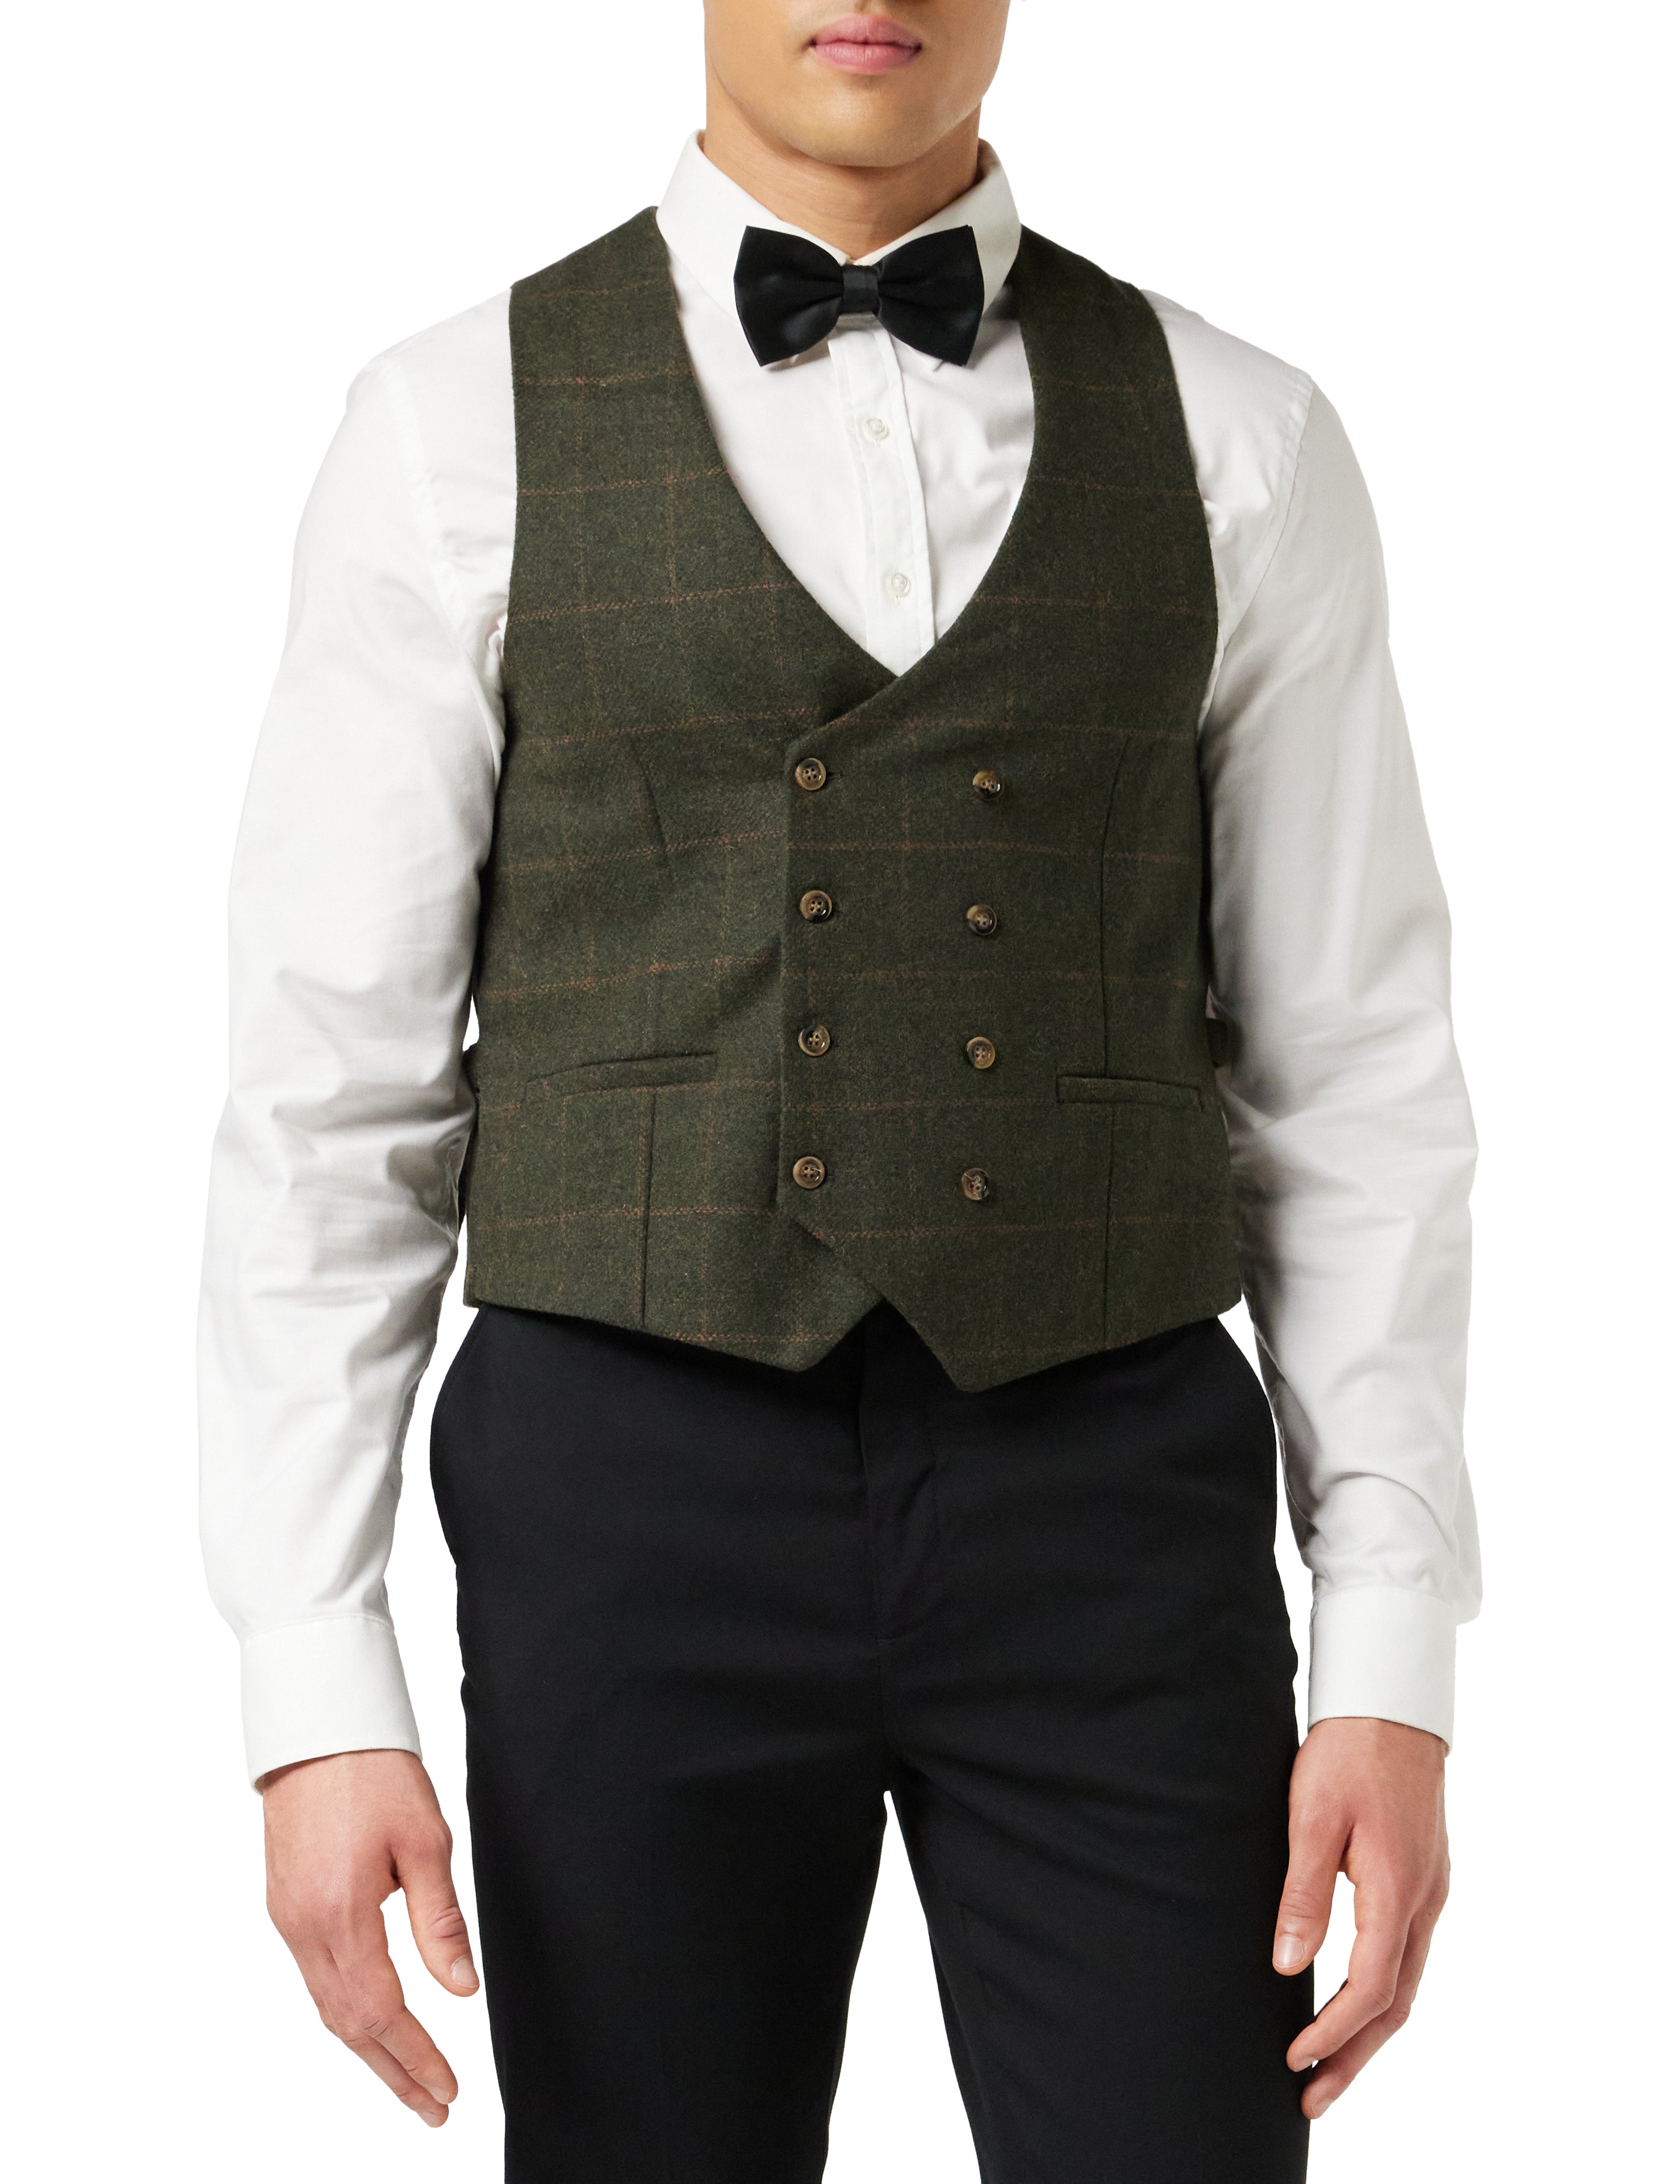 Tweed Check Double Breasted Green Waistcoat